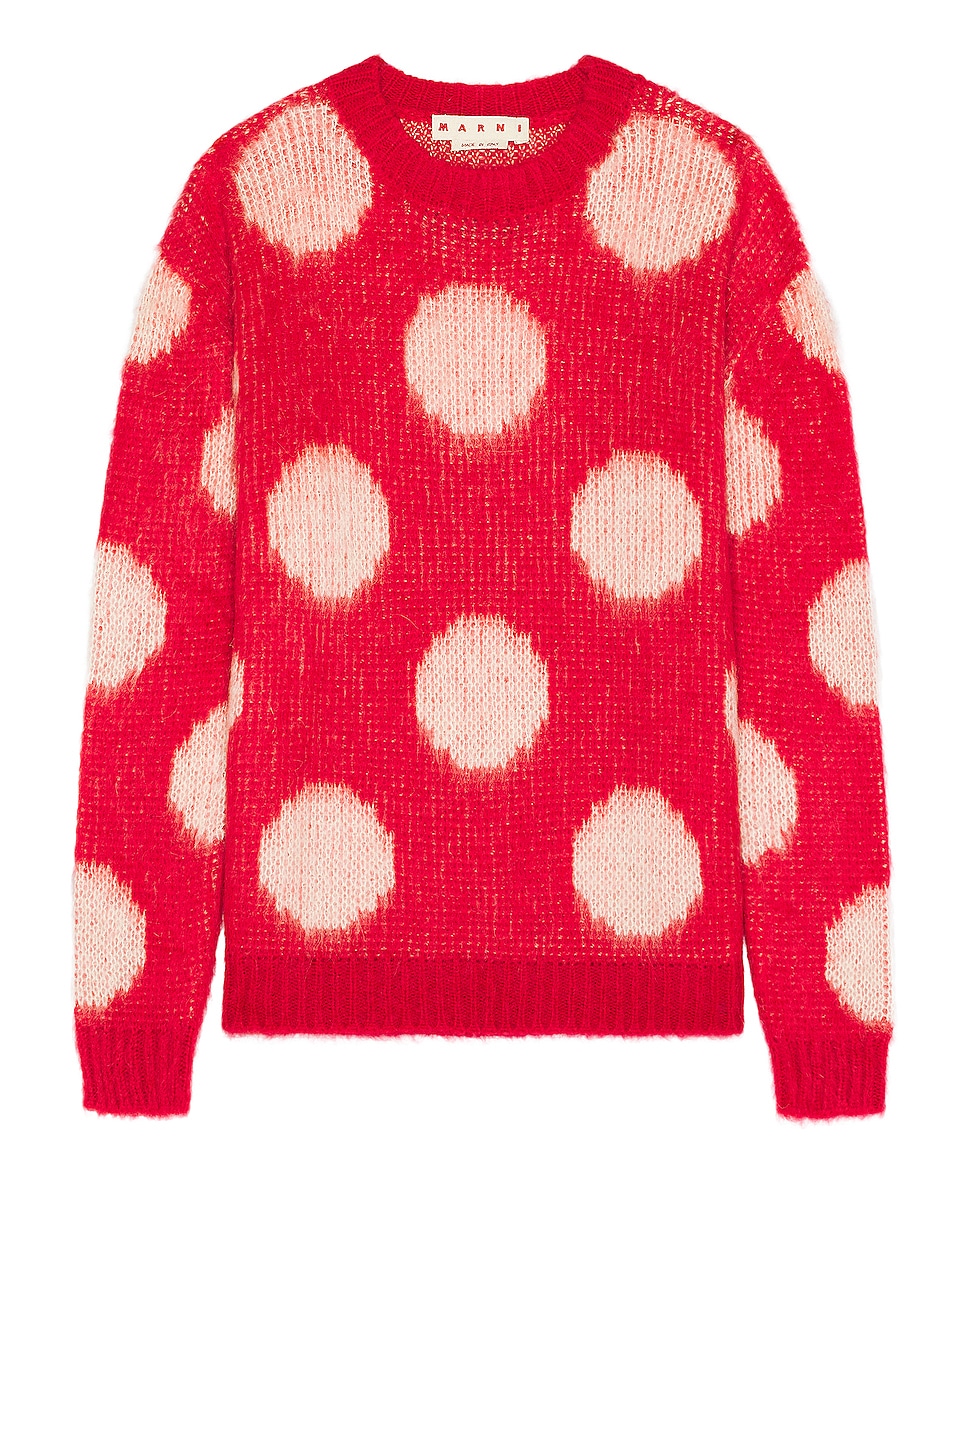 Image 1 of Marni Roundneck Sweater in Tulip